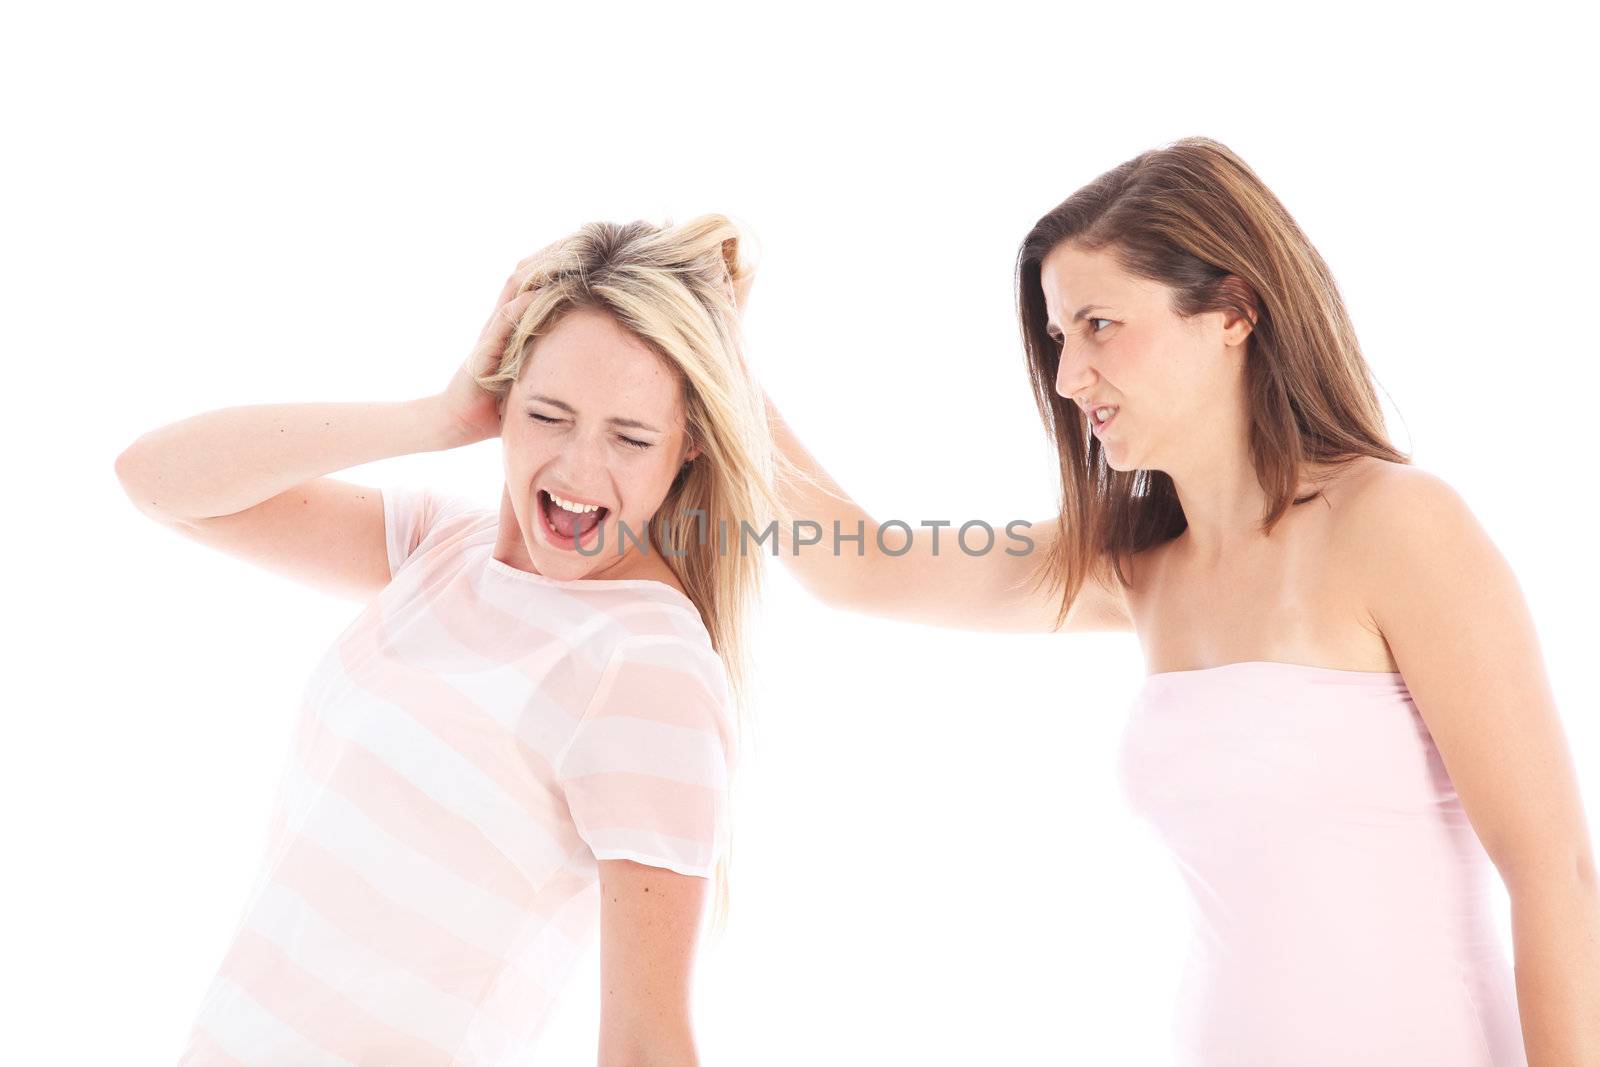 Vengeful woman pulling a second ladies hair with a look of spite and anger in retaliattion for an imagined wrongdoing 